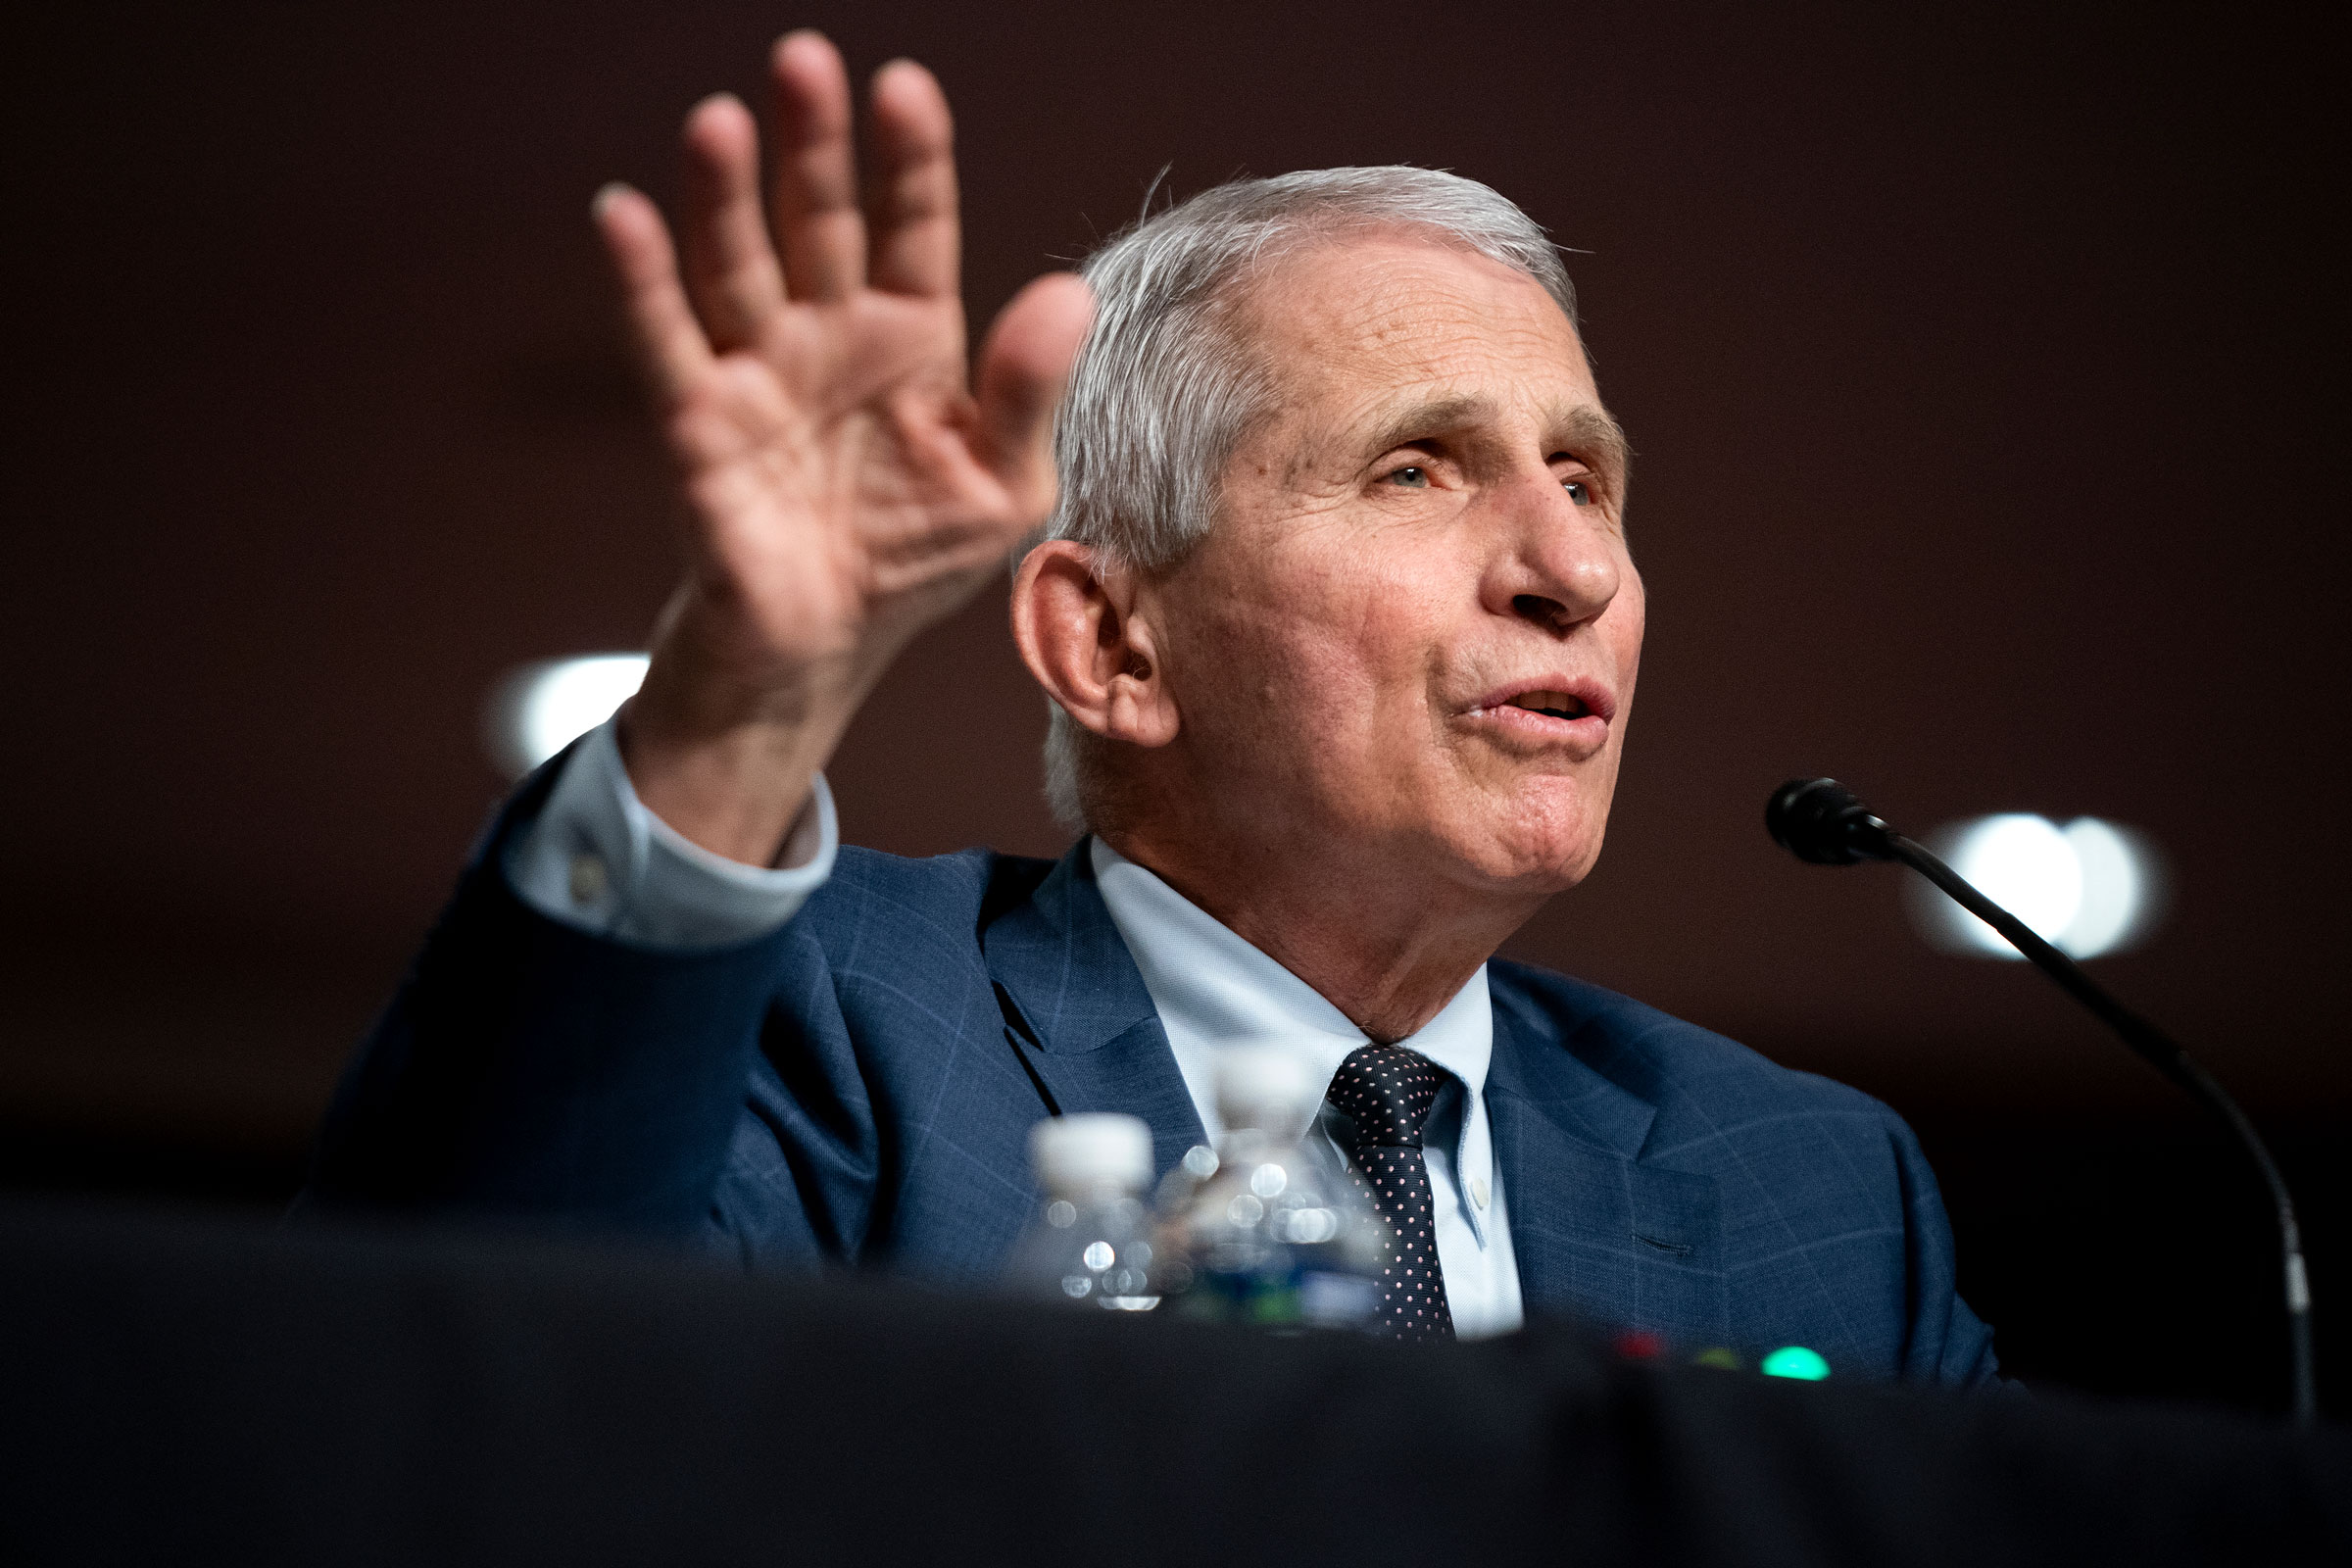 Dr. Anthony Fauci, White House Chief Medical Advisor and Director of the NIAID, testifies at a Senate Health, Education, Labor, and Pensions Committee hearing on Capitol Hill on January 11, 2022 in Washington, D.C. (Greg Nash—Pool/Getty Images)